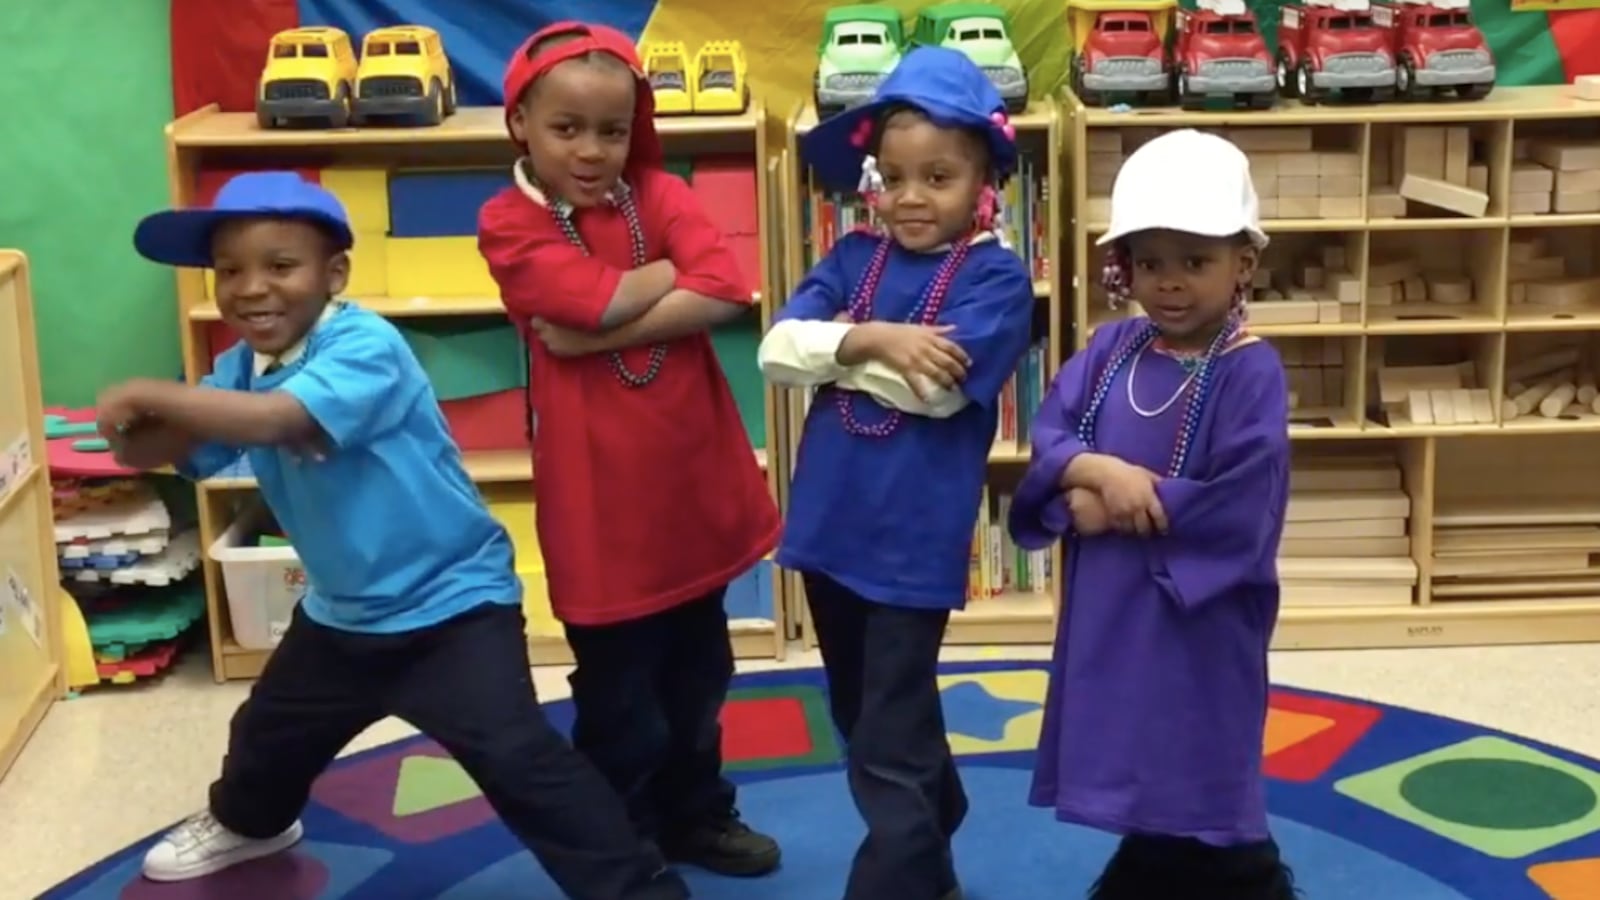 Students at Coleman A. Young Elementary School pose in a screenshot from "Pushing to Success."